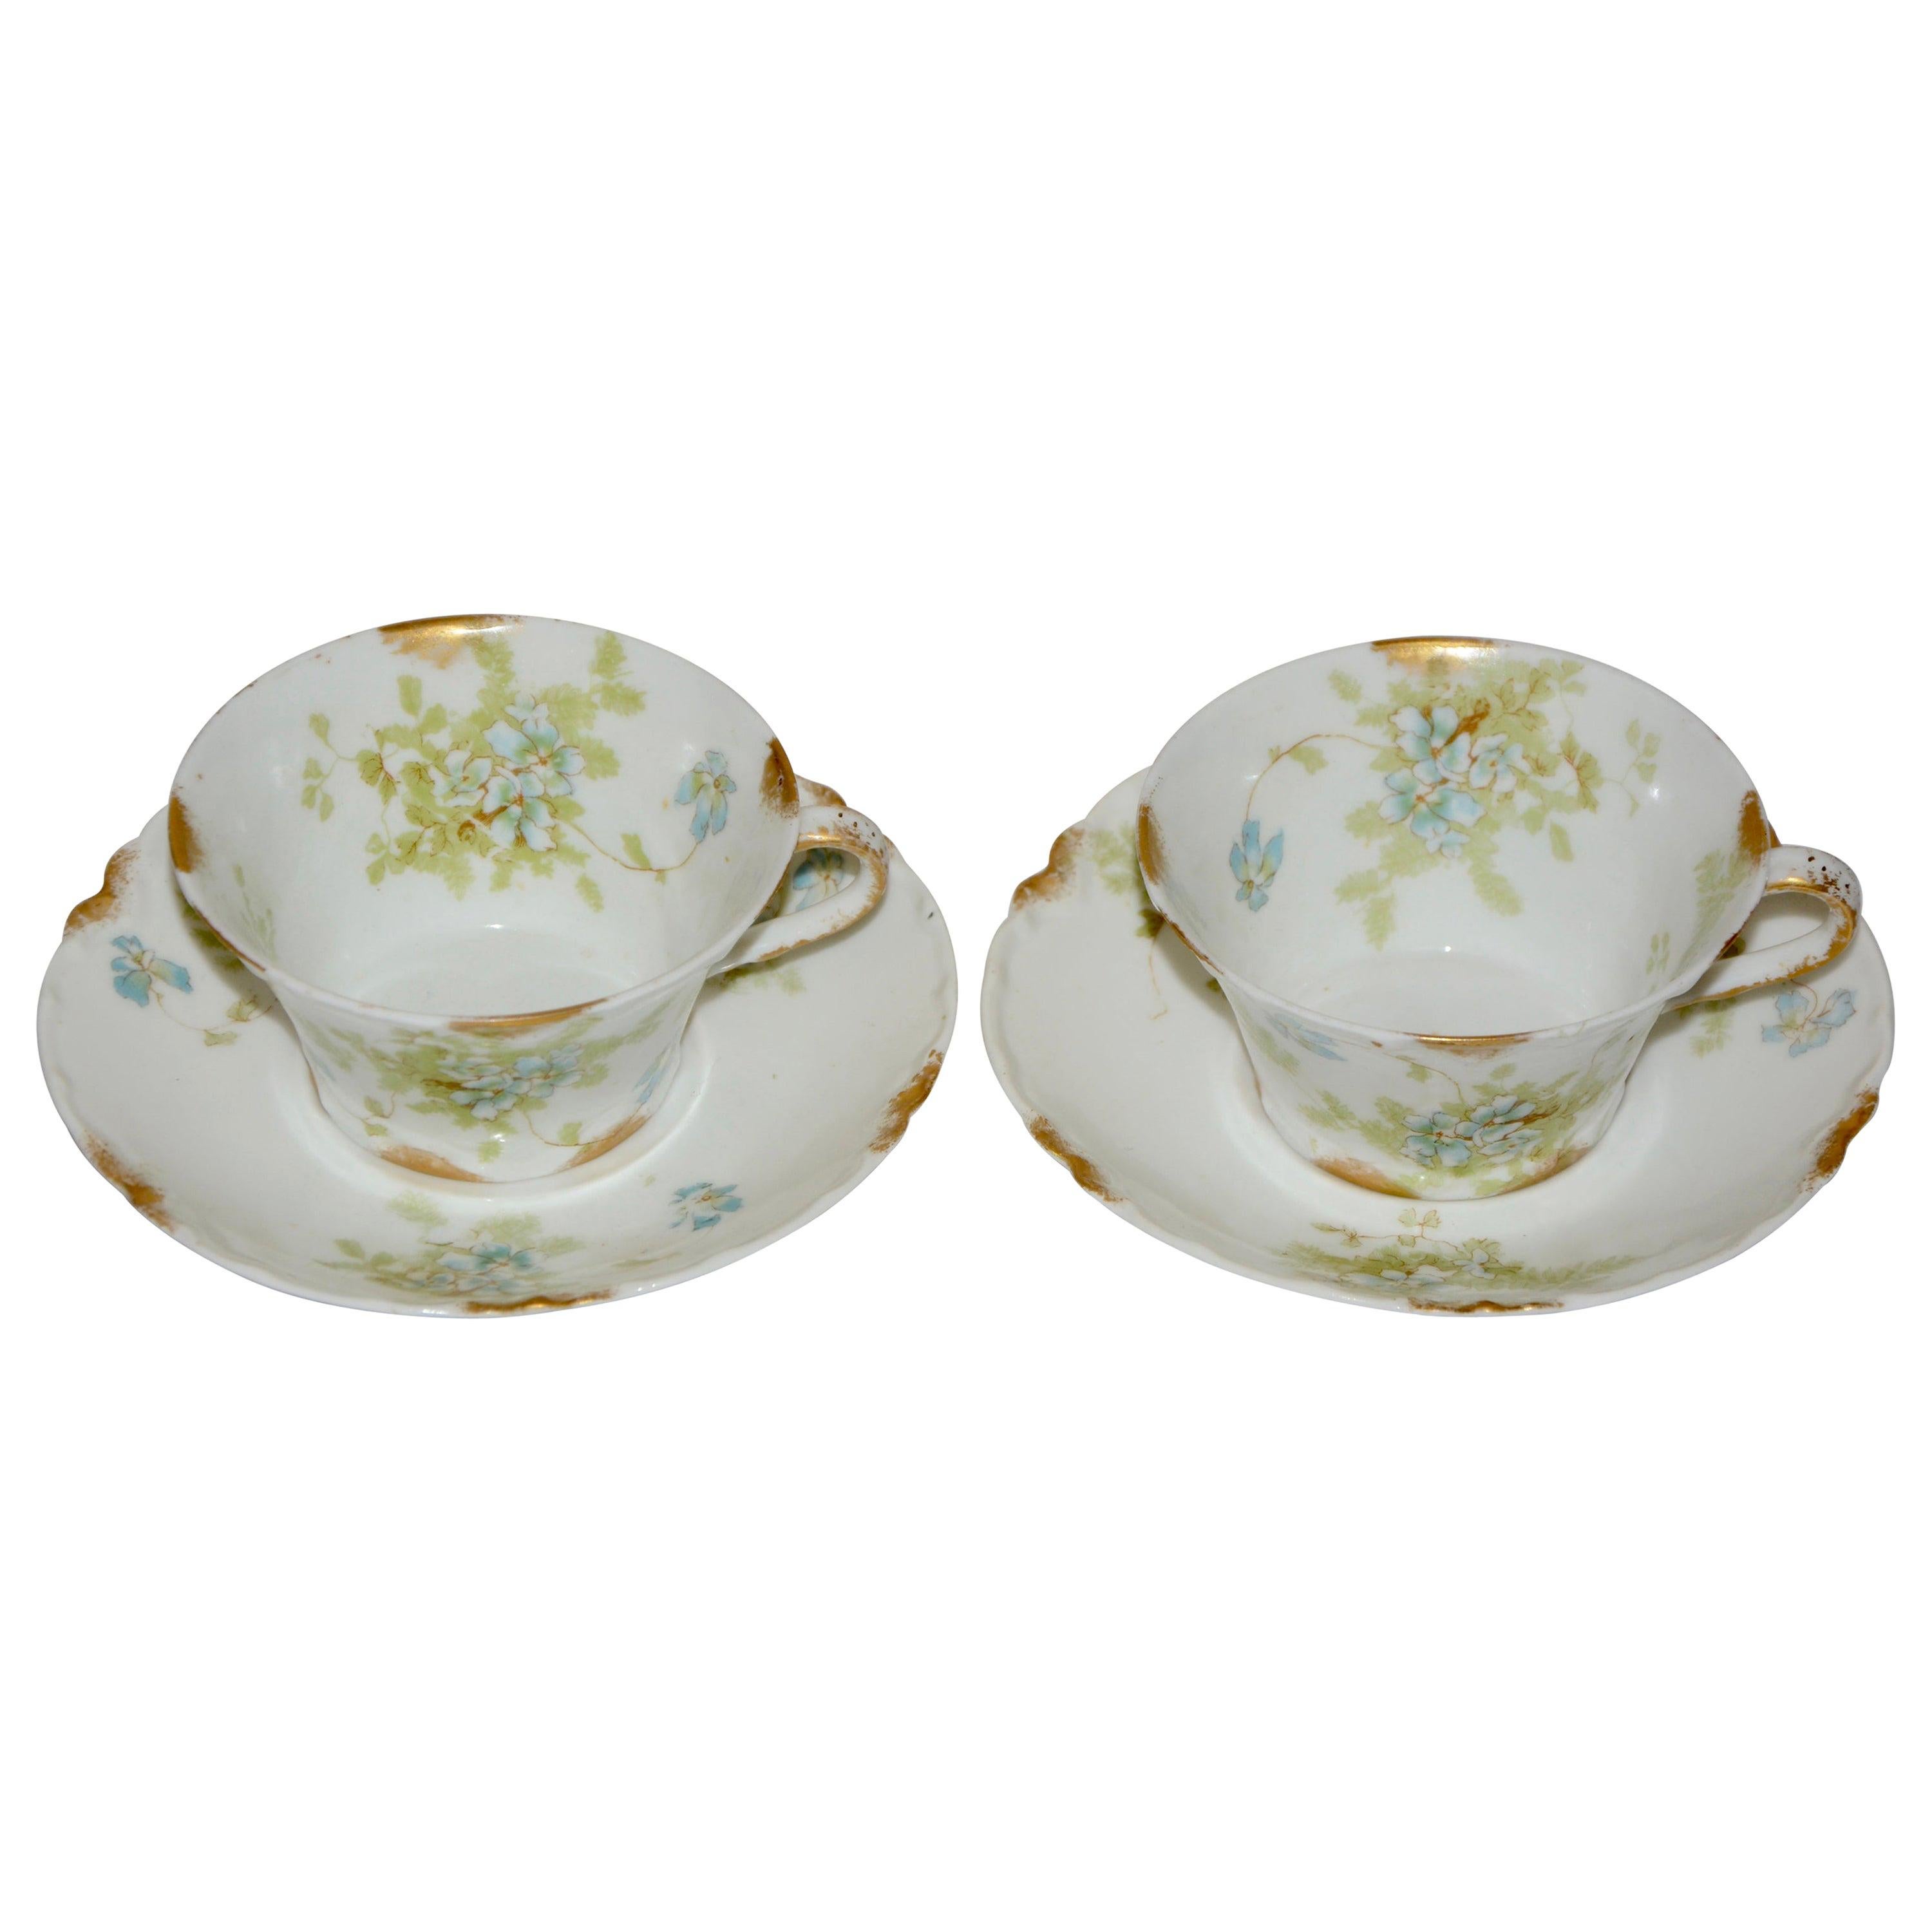 Limoges Haviland H & C Van Heusen Charles Co. New York Pair of Cup and Saucers For Sale